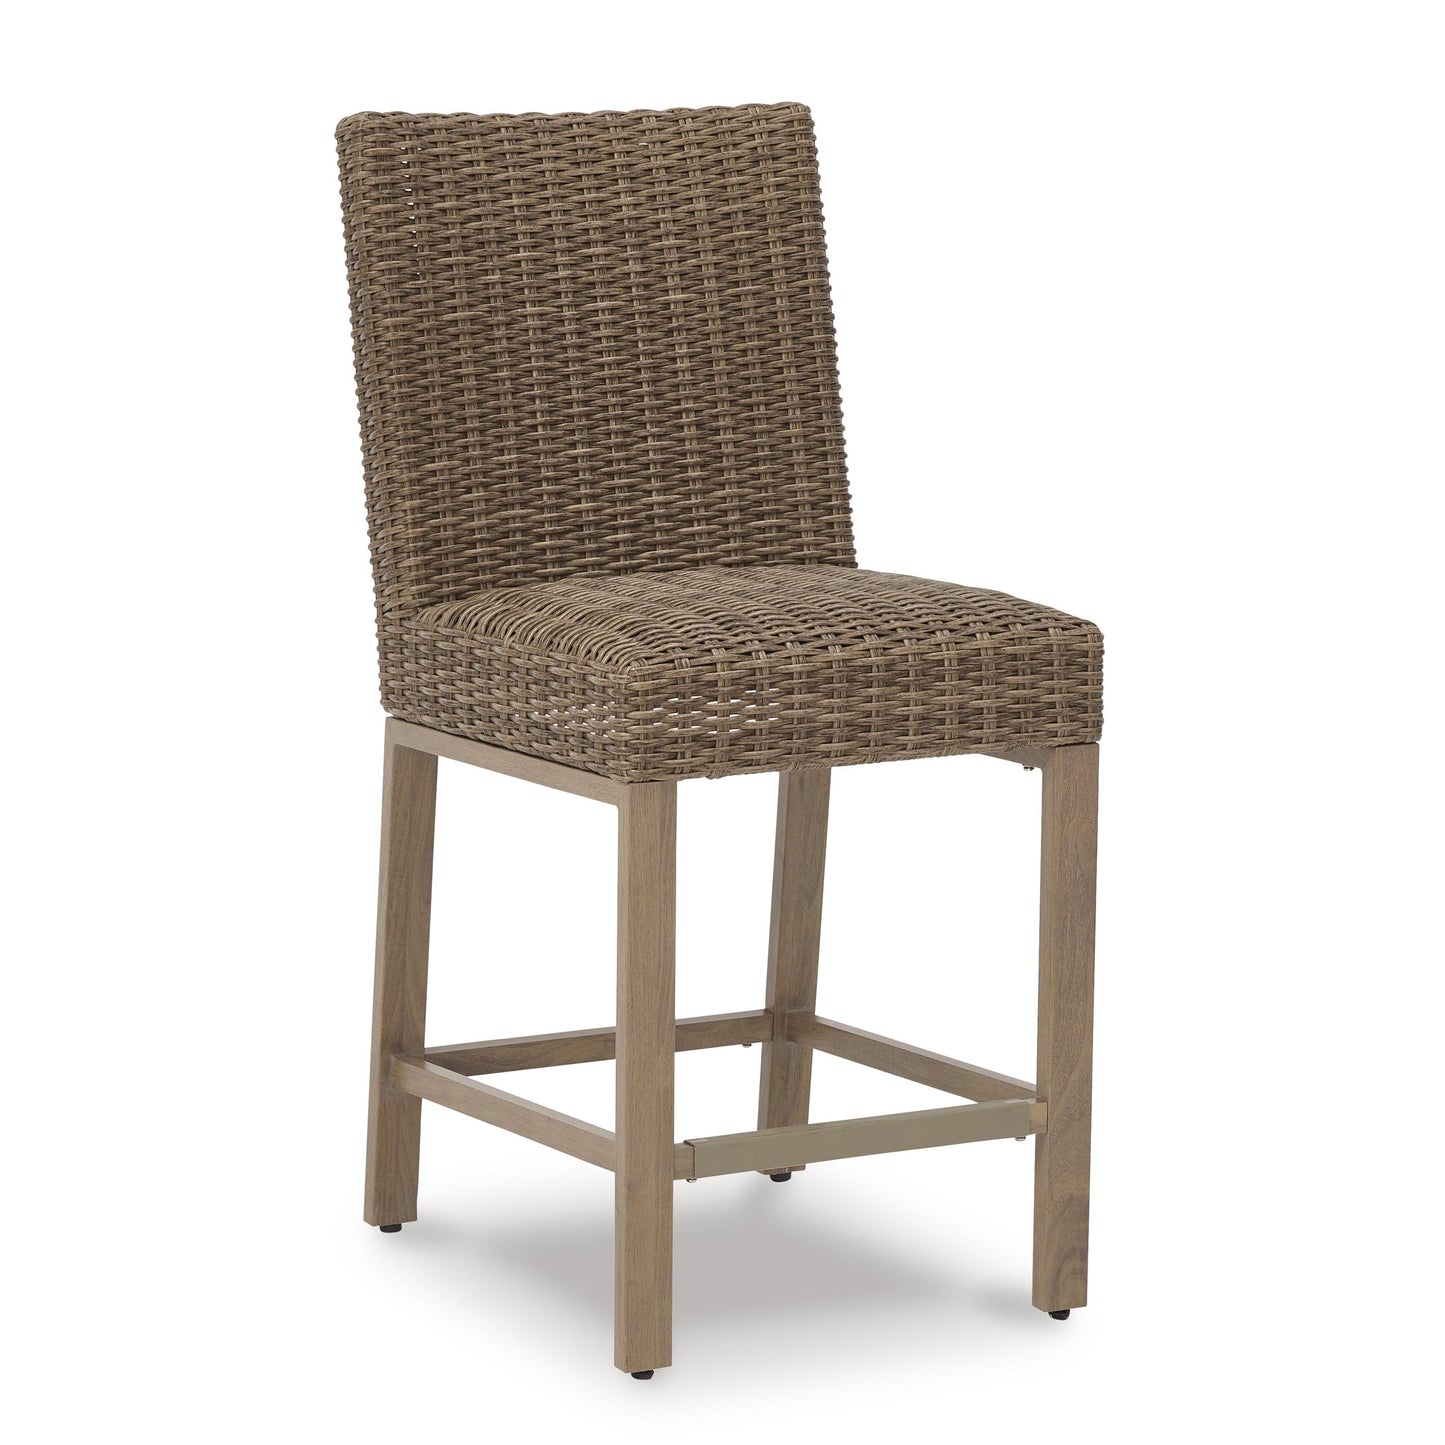 Signature Design by Ashley Outdoor Seating Stools P749-130 IMAGE 1